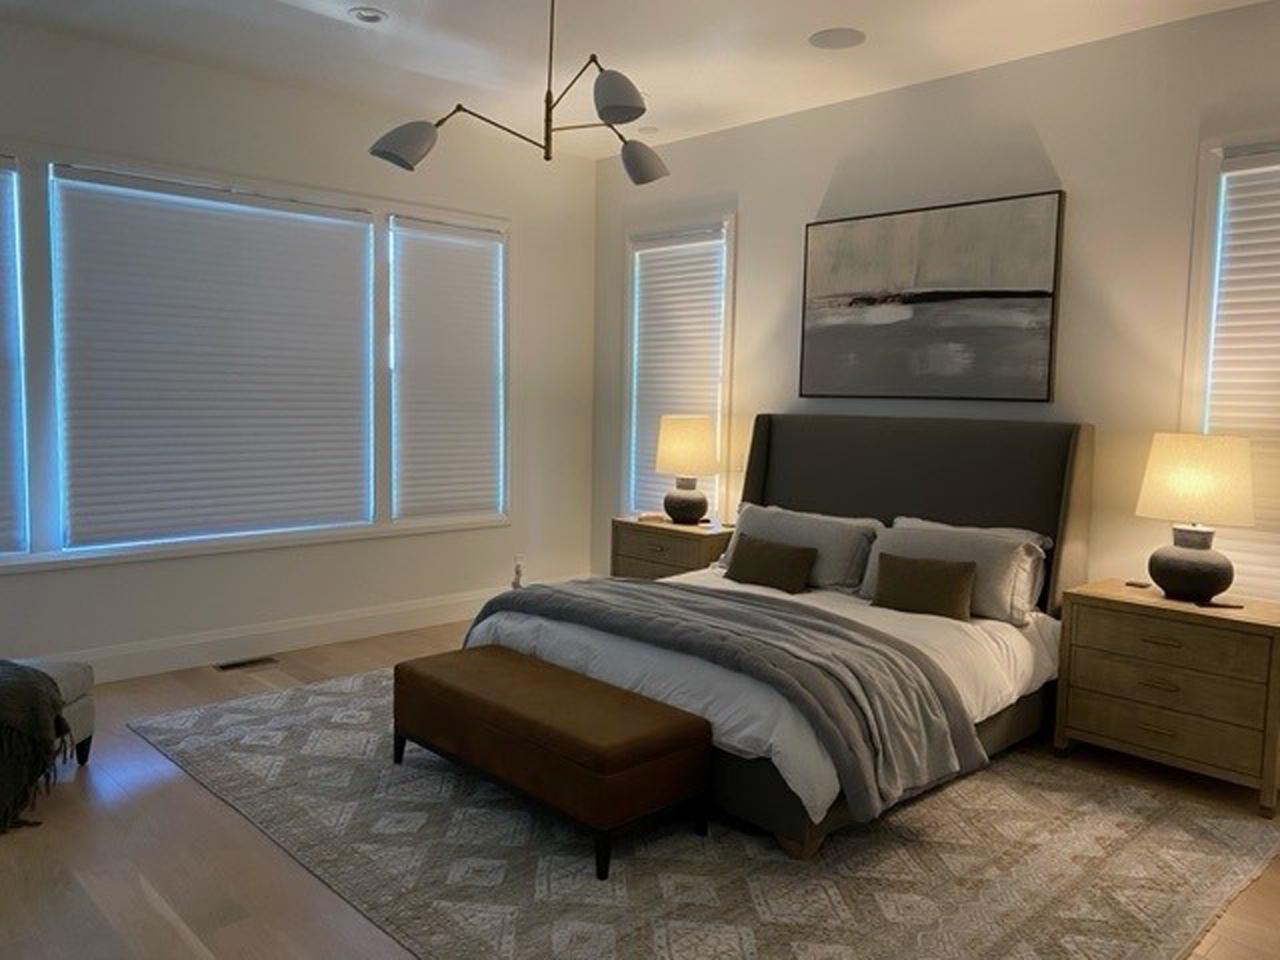 Duette shades in bedroom